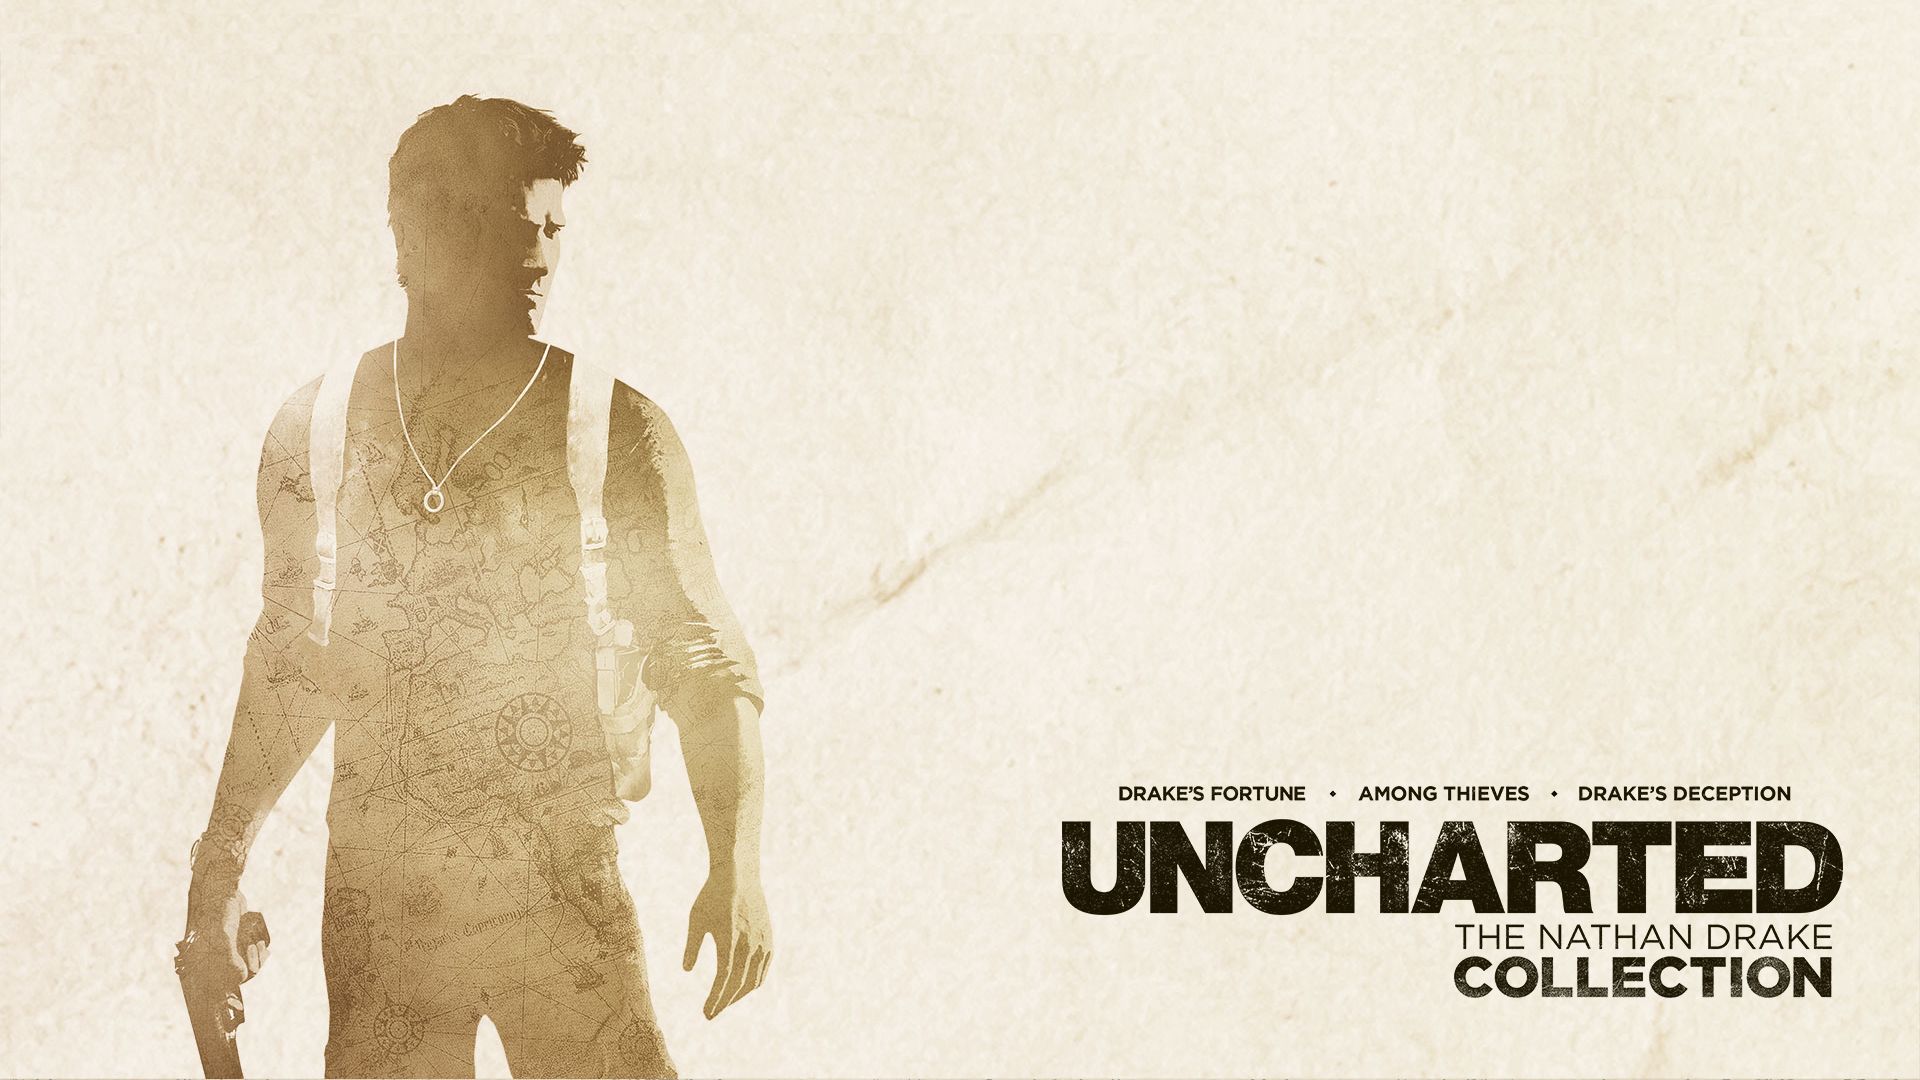 uncharted nathan drake collection ps4 free